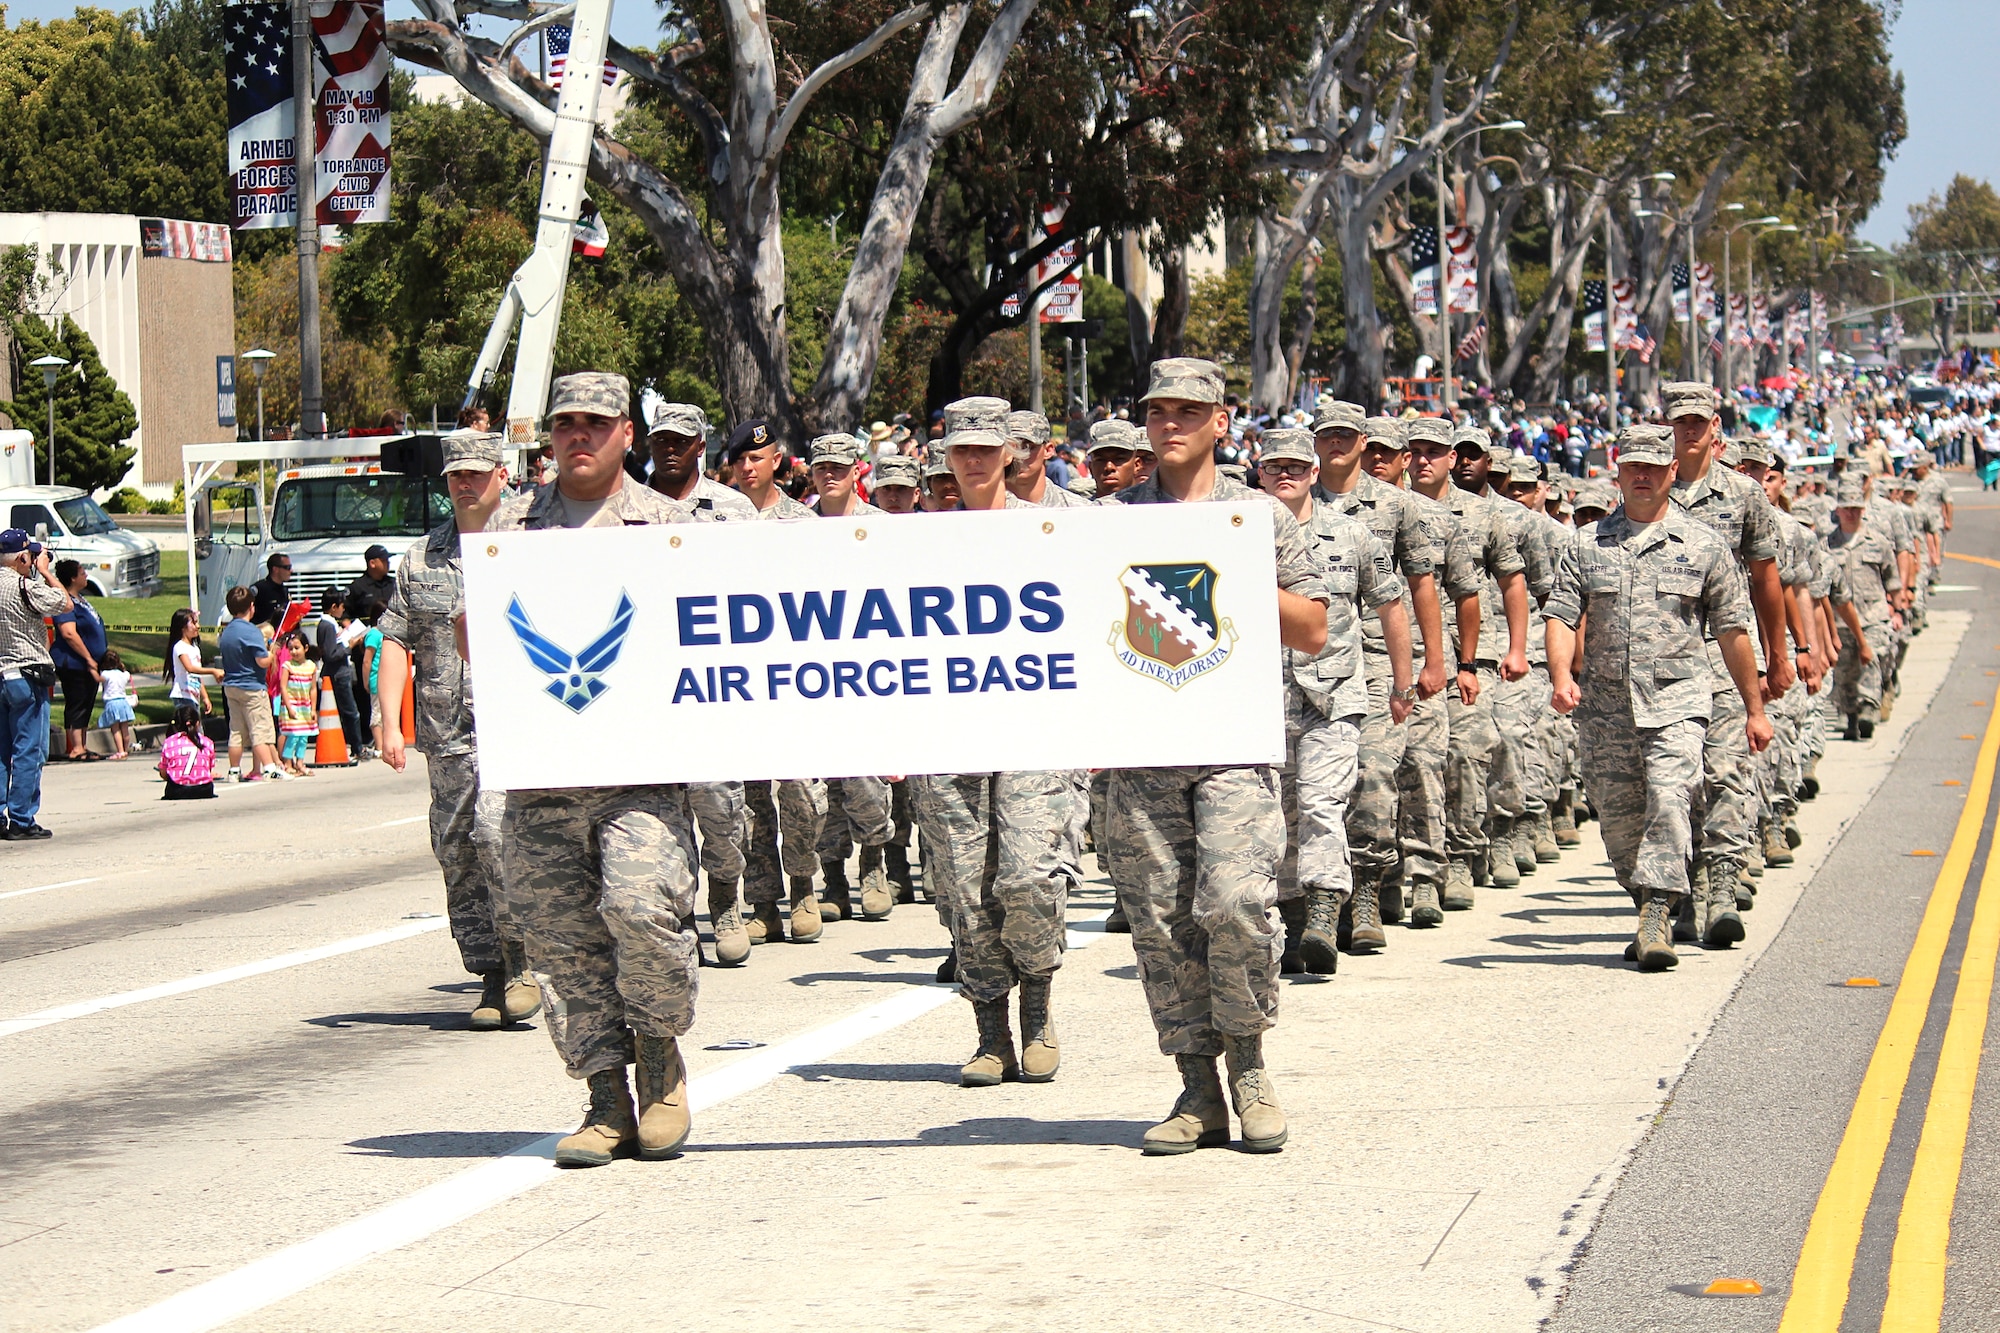 Team Edwards marches in front of a onlookers at the 53rd Annual Torrance Armed Forces Day Parade, May 19.  The parade featured all services including the U.S. Coast Guard.  The parade was the main event of Torrance's Annual Armed Forces Day Celebration, which goes from May 18 to 20.  (U.S. Air Force photo by Melissa Buchanan)